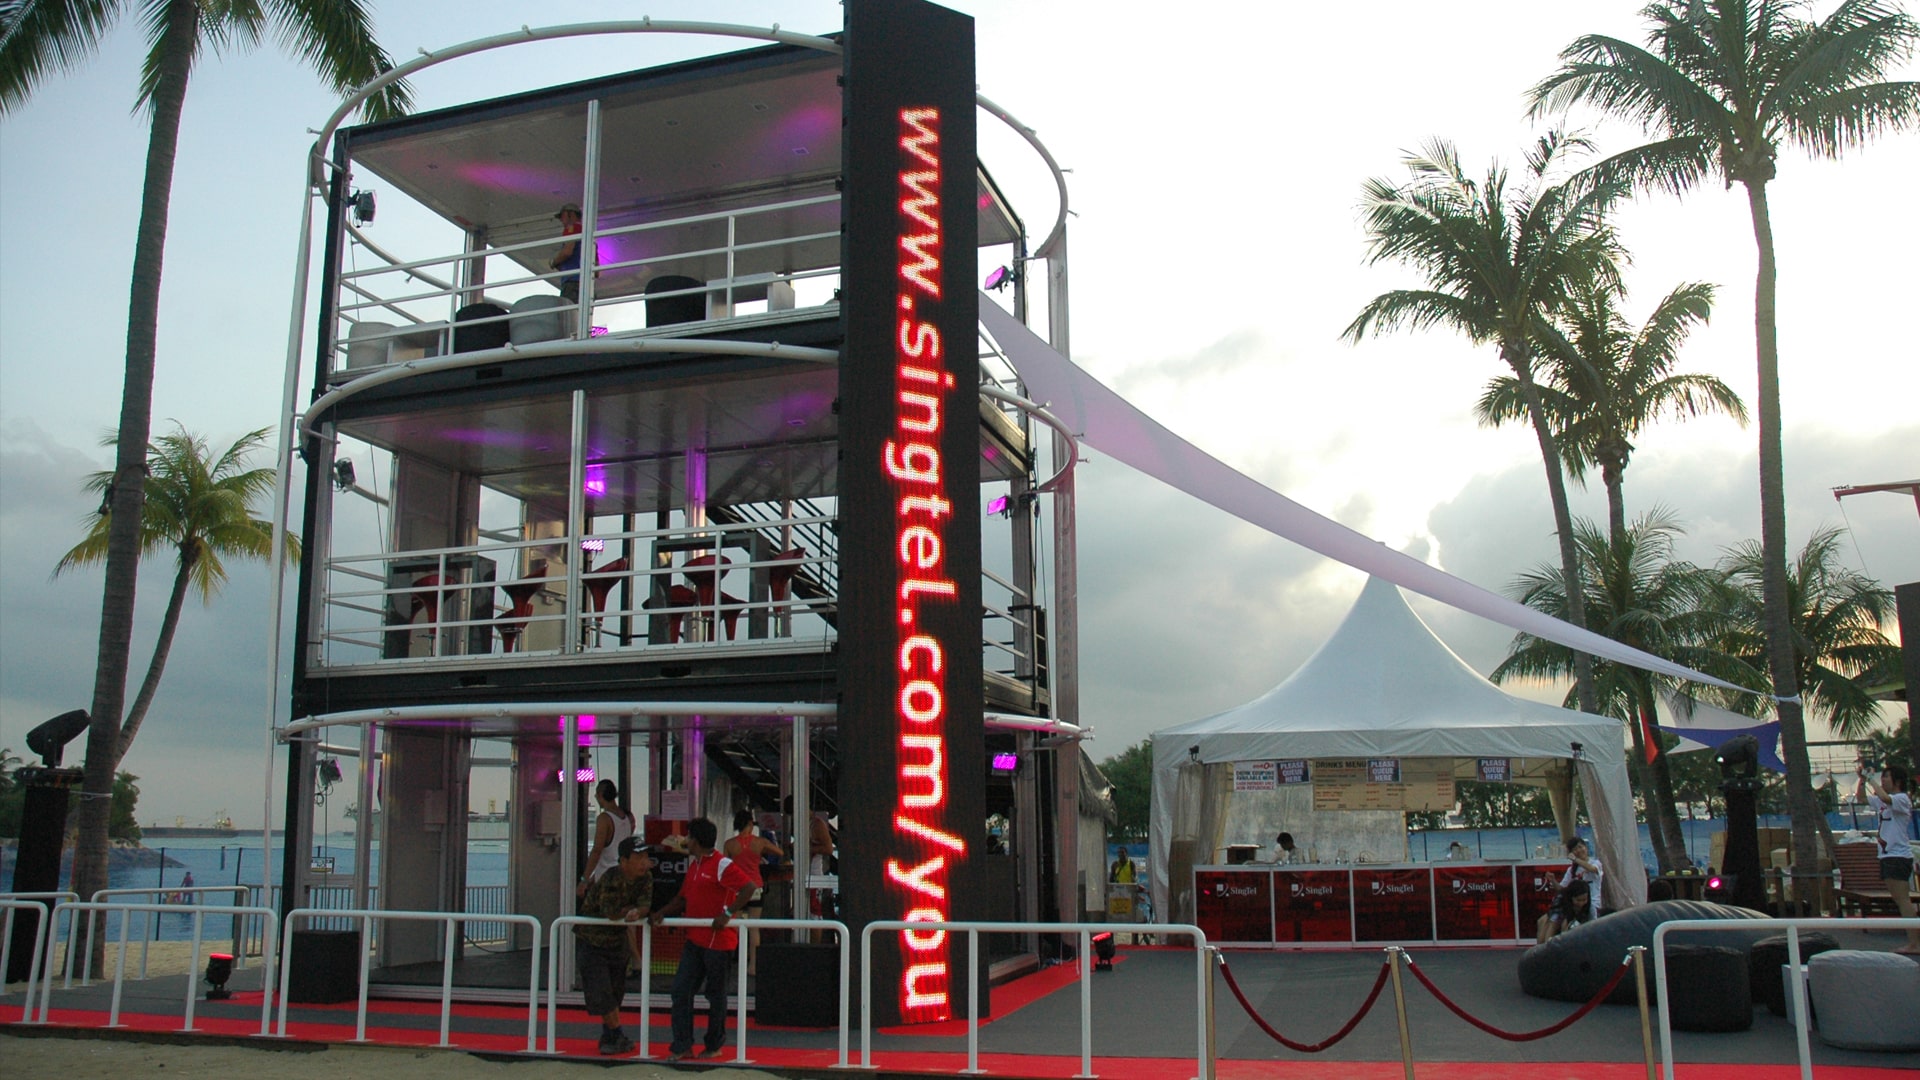 tsc_opt-images_customized-containers_zoukout-singtel-lounge-area-1920x1080-04-min